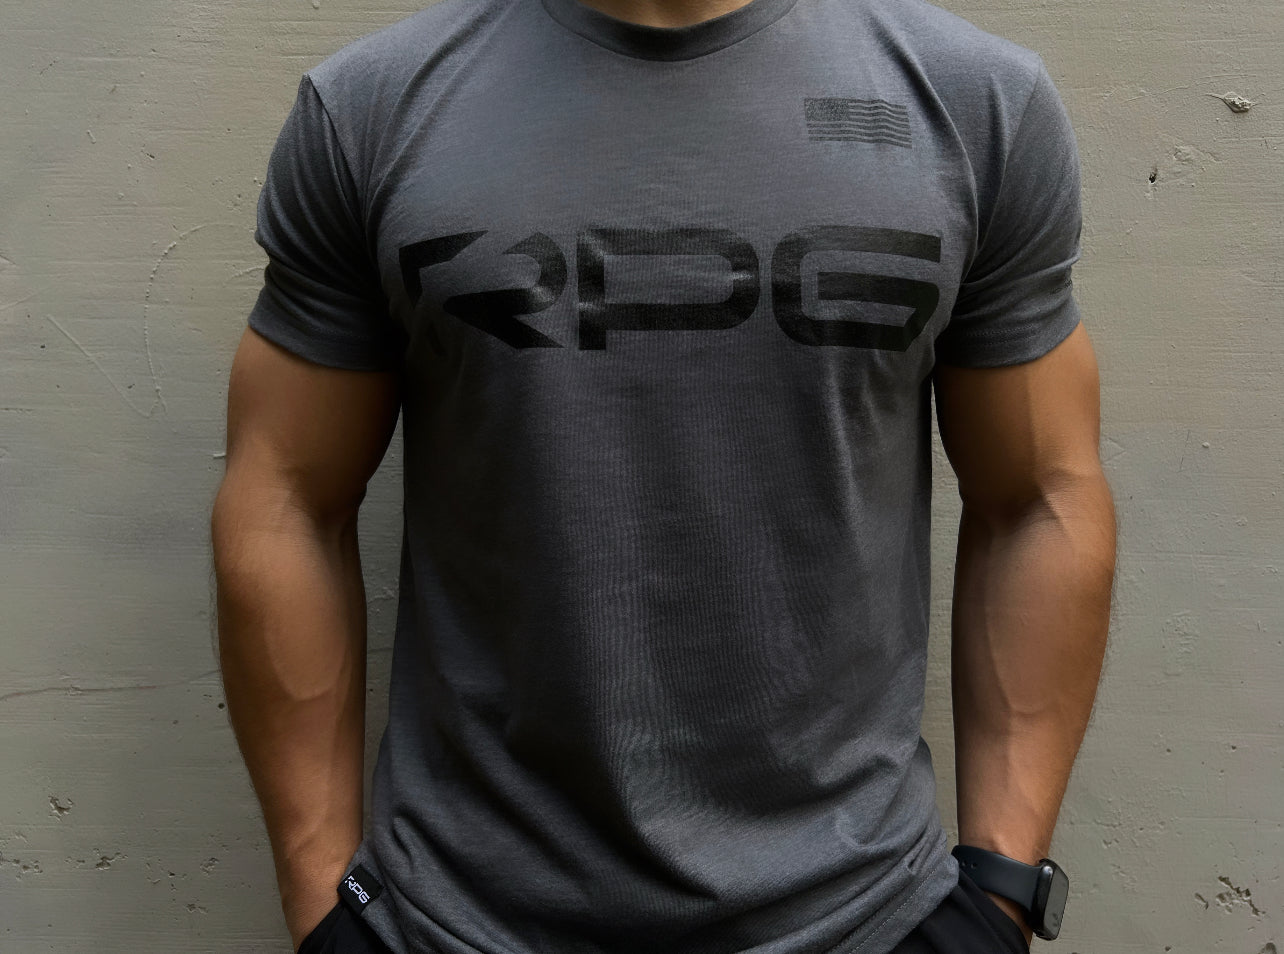 Which Men's Workout Shirt is Best for You?